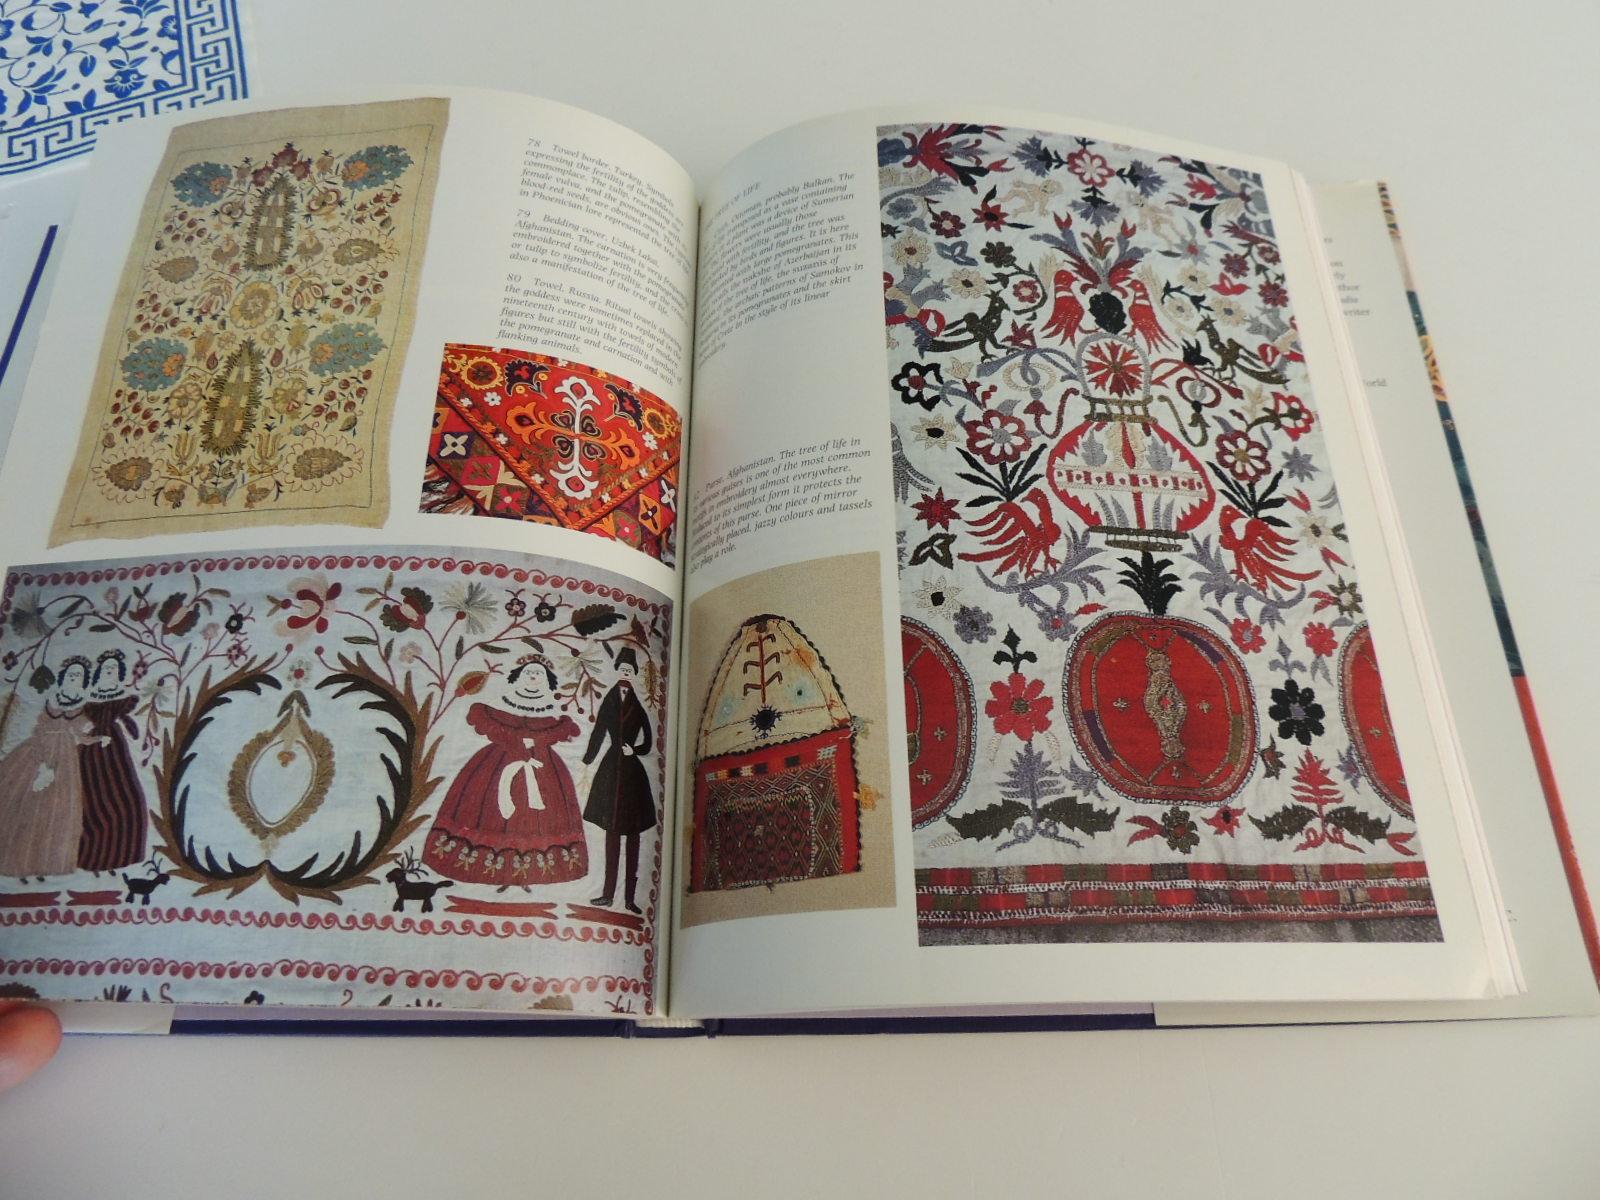 Late 20th Century Embroidered Textiles, Traditional Patterns from Five Continents Hardcover Book